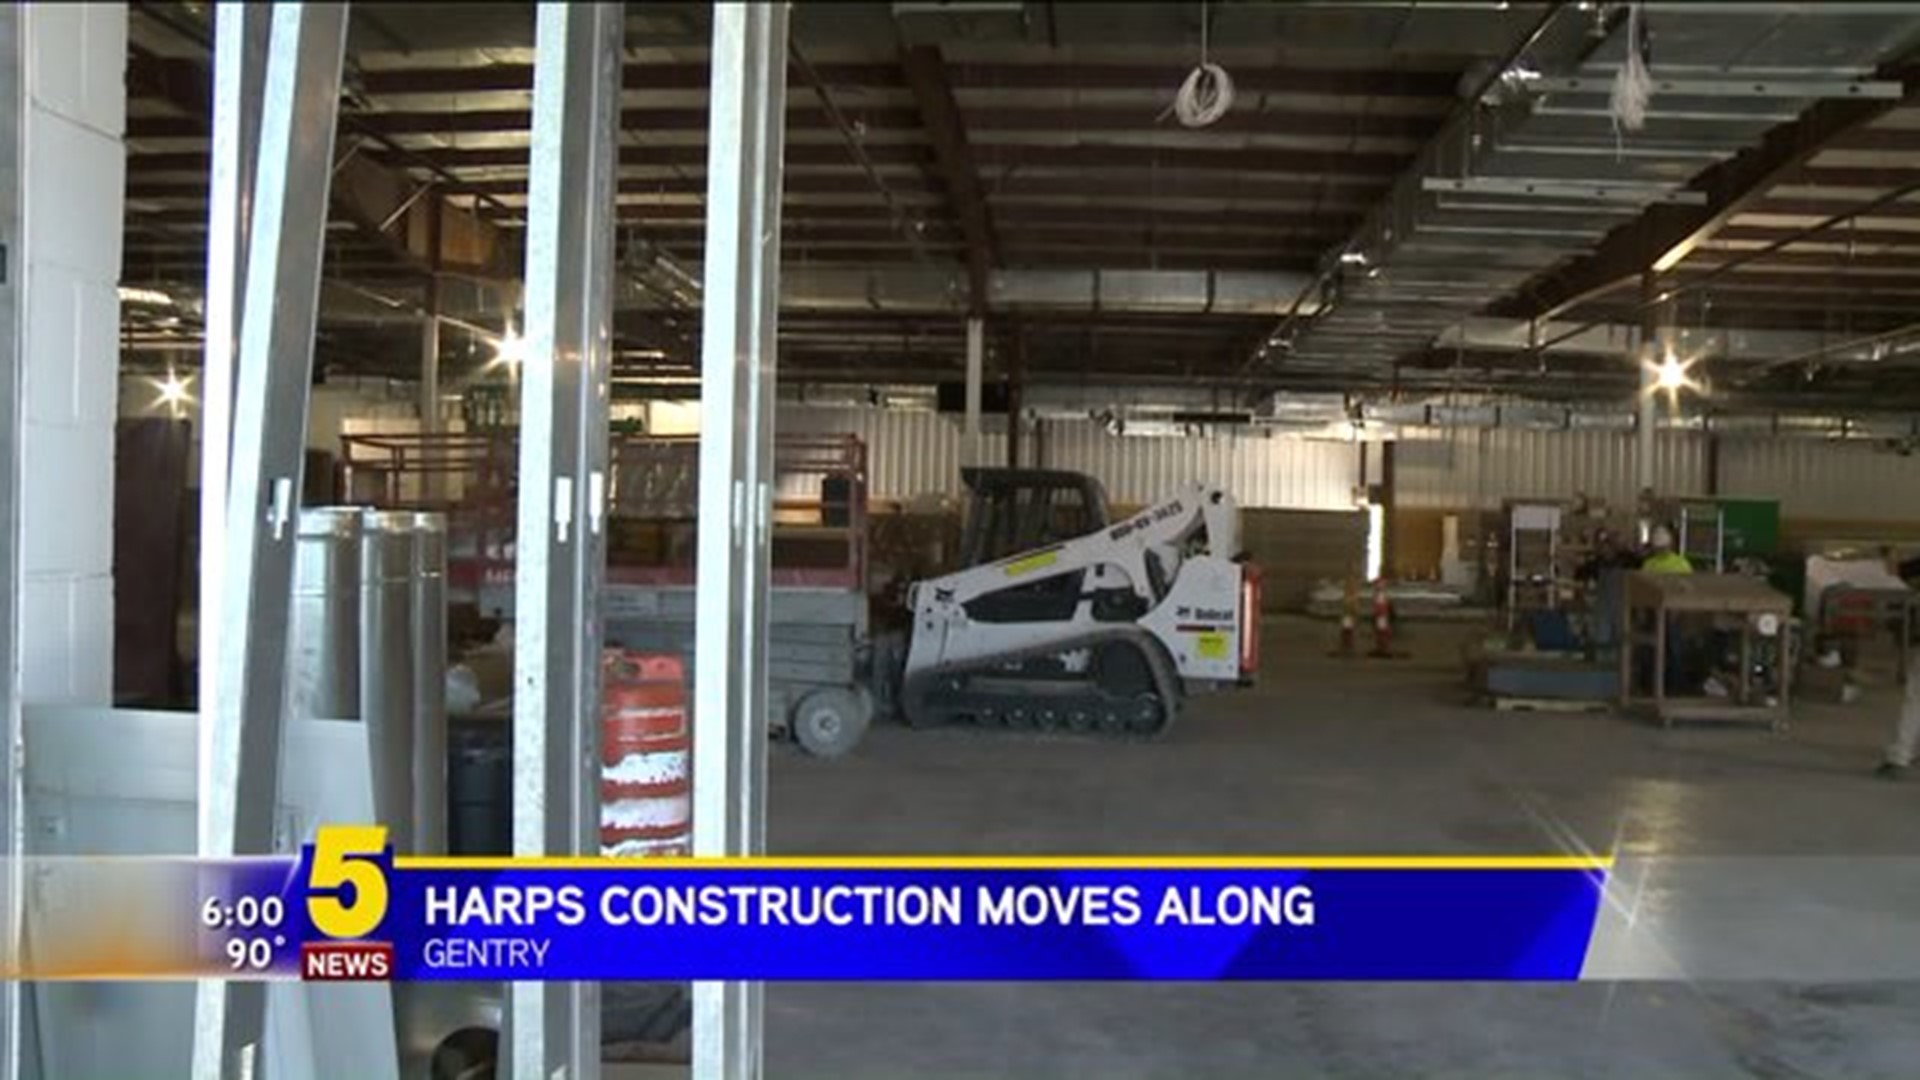 HARPS COMING TO GENTRY